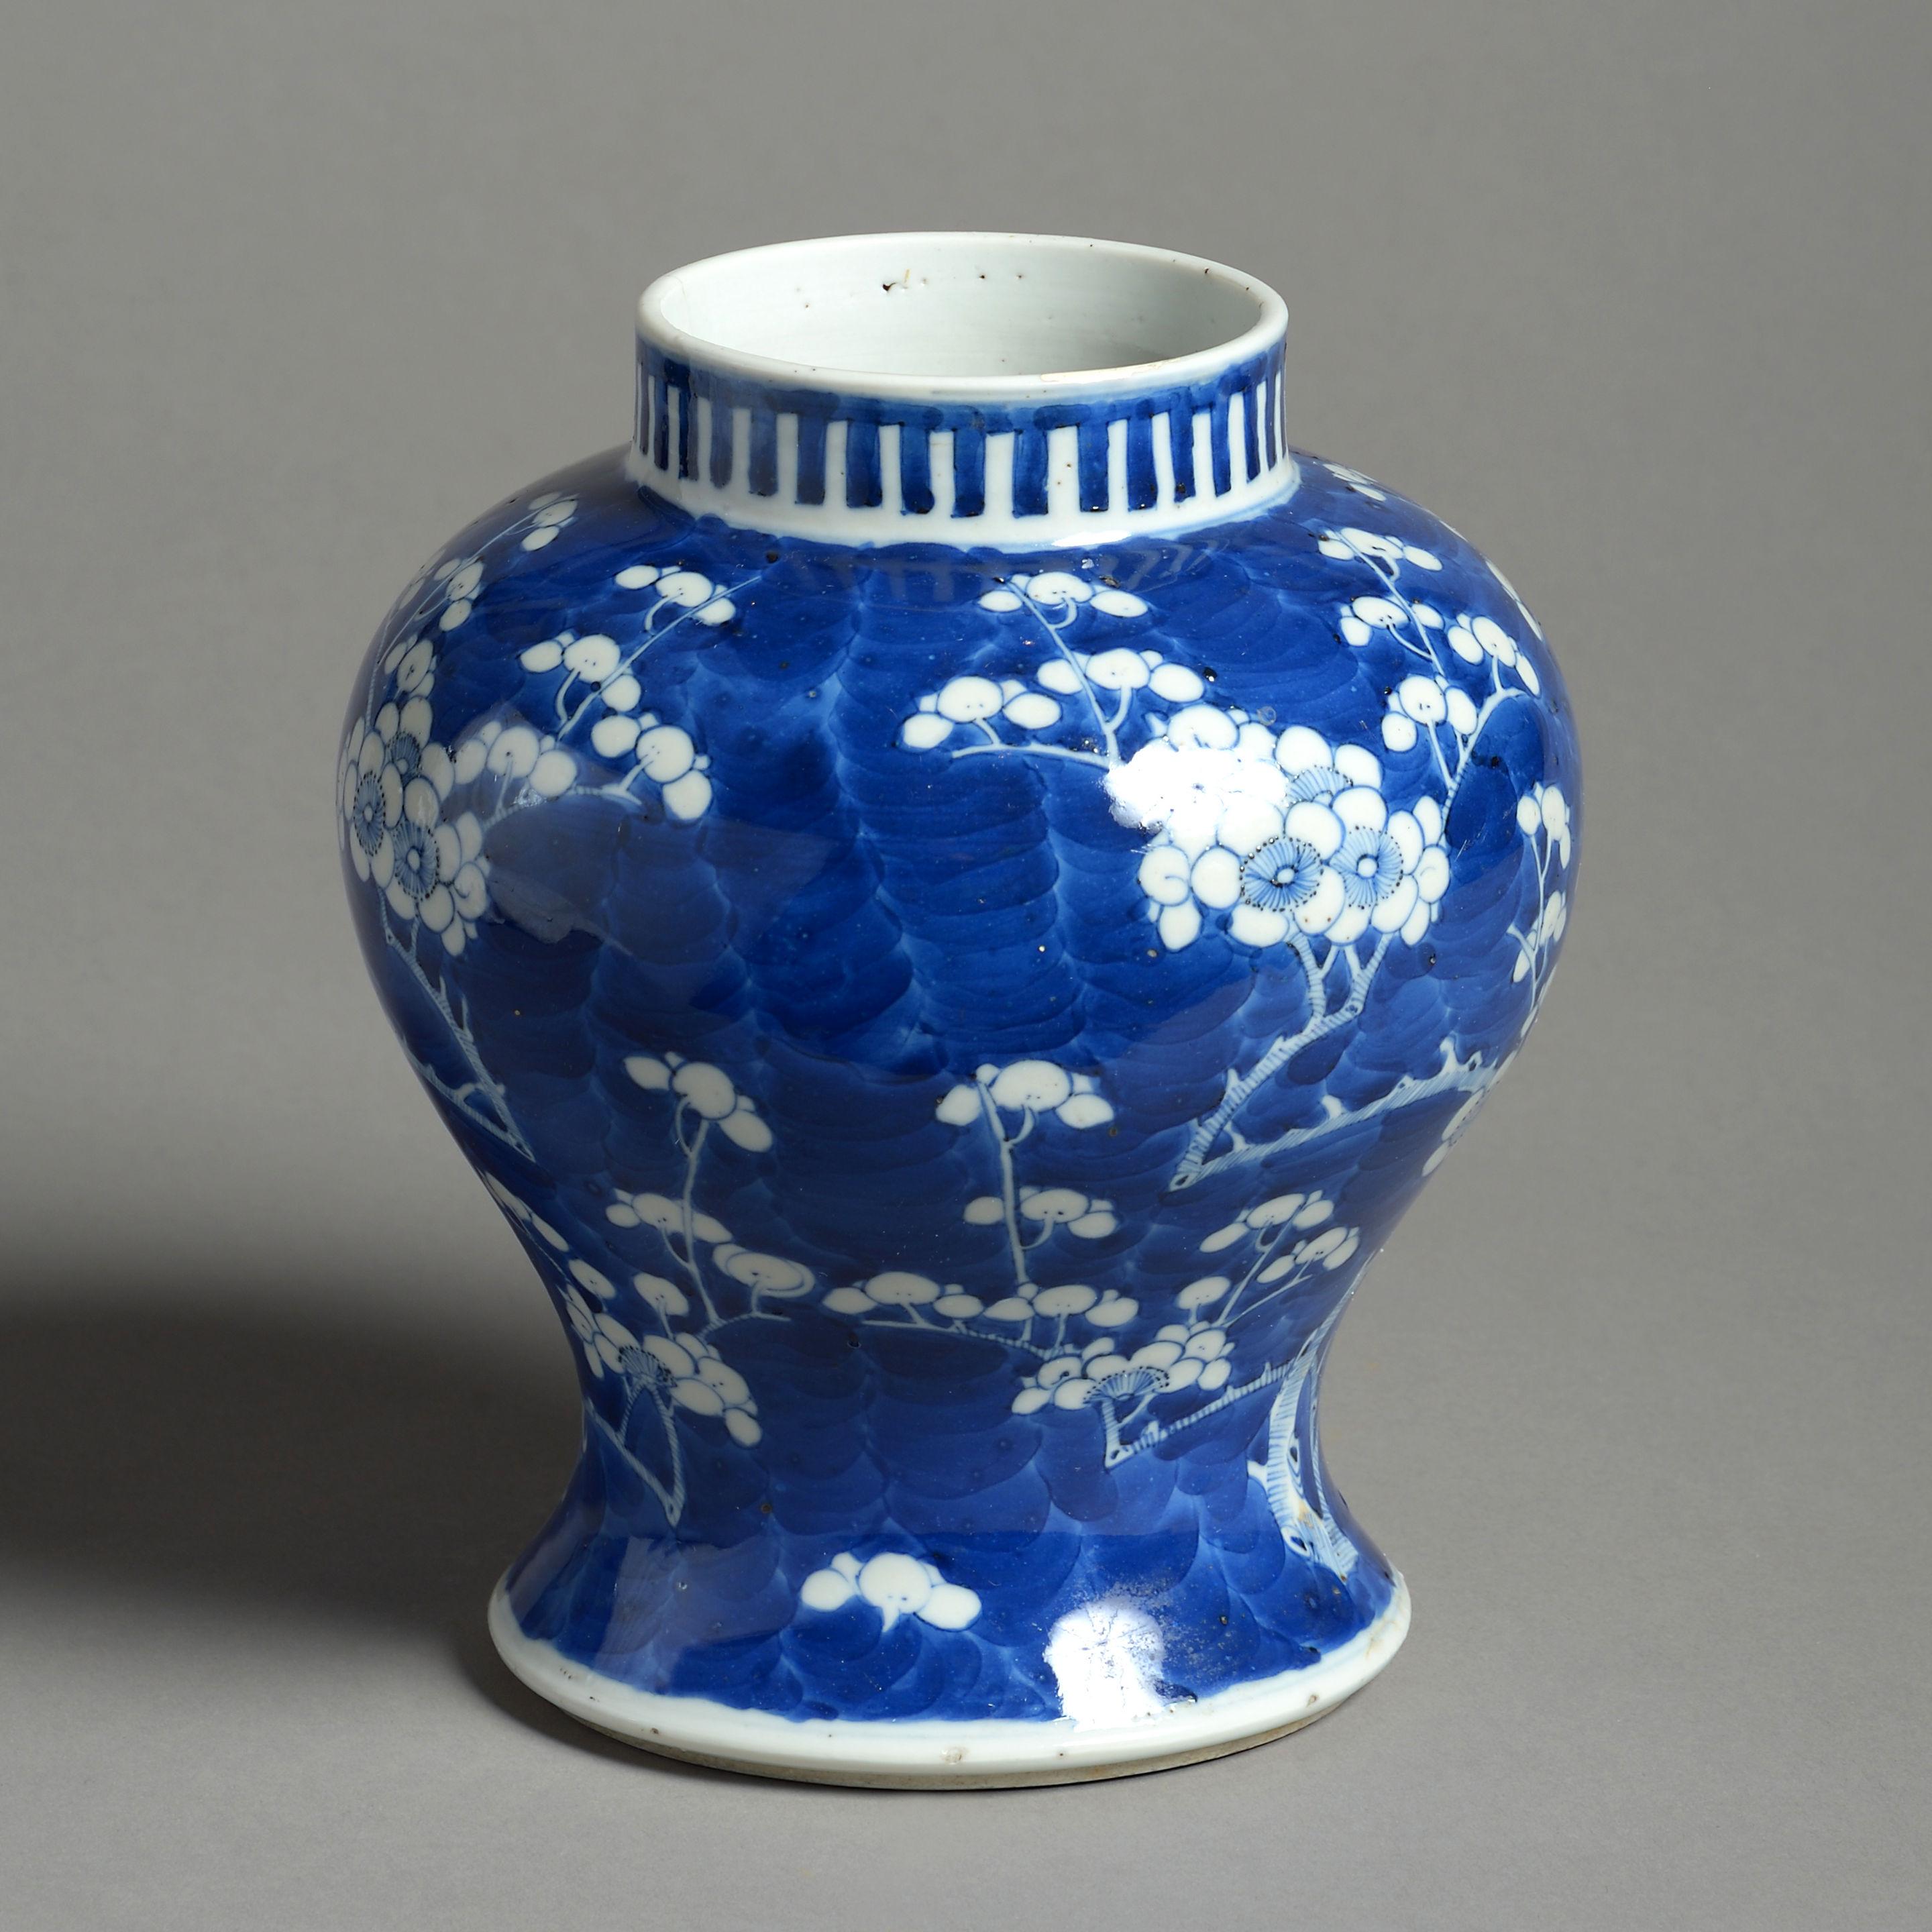 A mid-19th century porcelain baluster vase, decorated throughout with white prunus blossom upon a blue ground in the Kangxi manner. 

Having four character marks to the underside. A hairline to the rim.